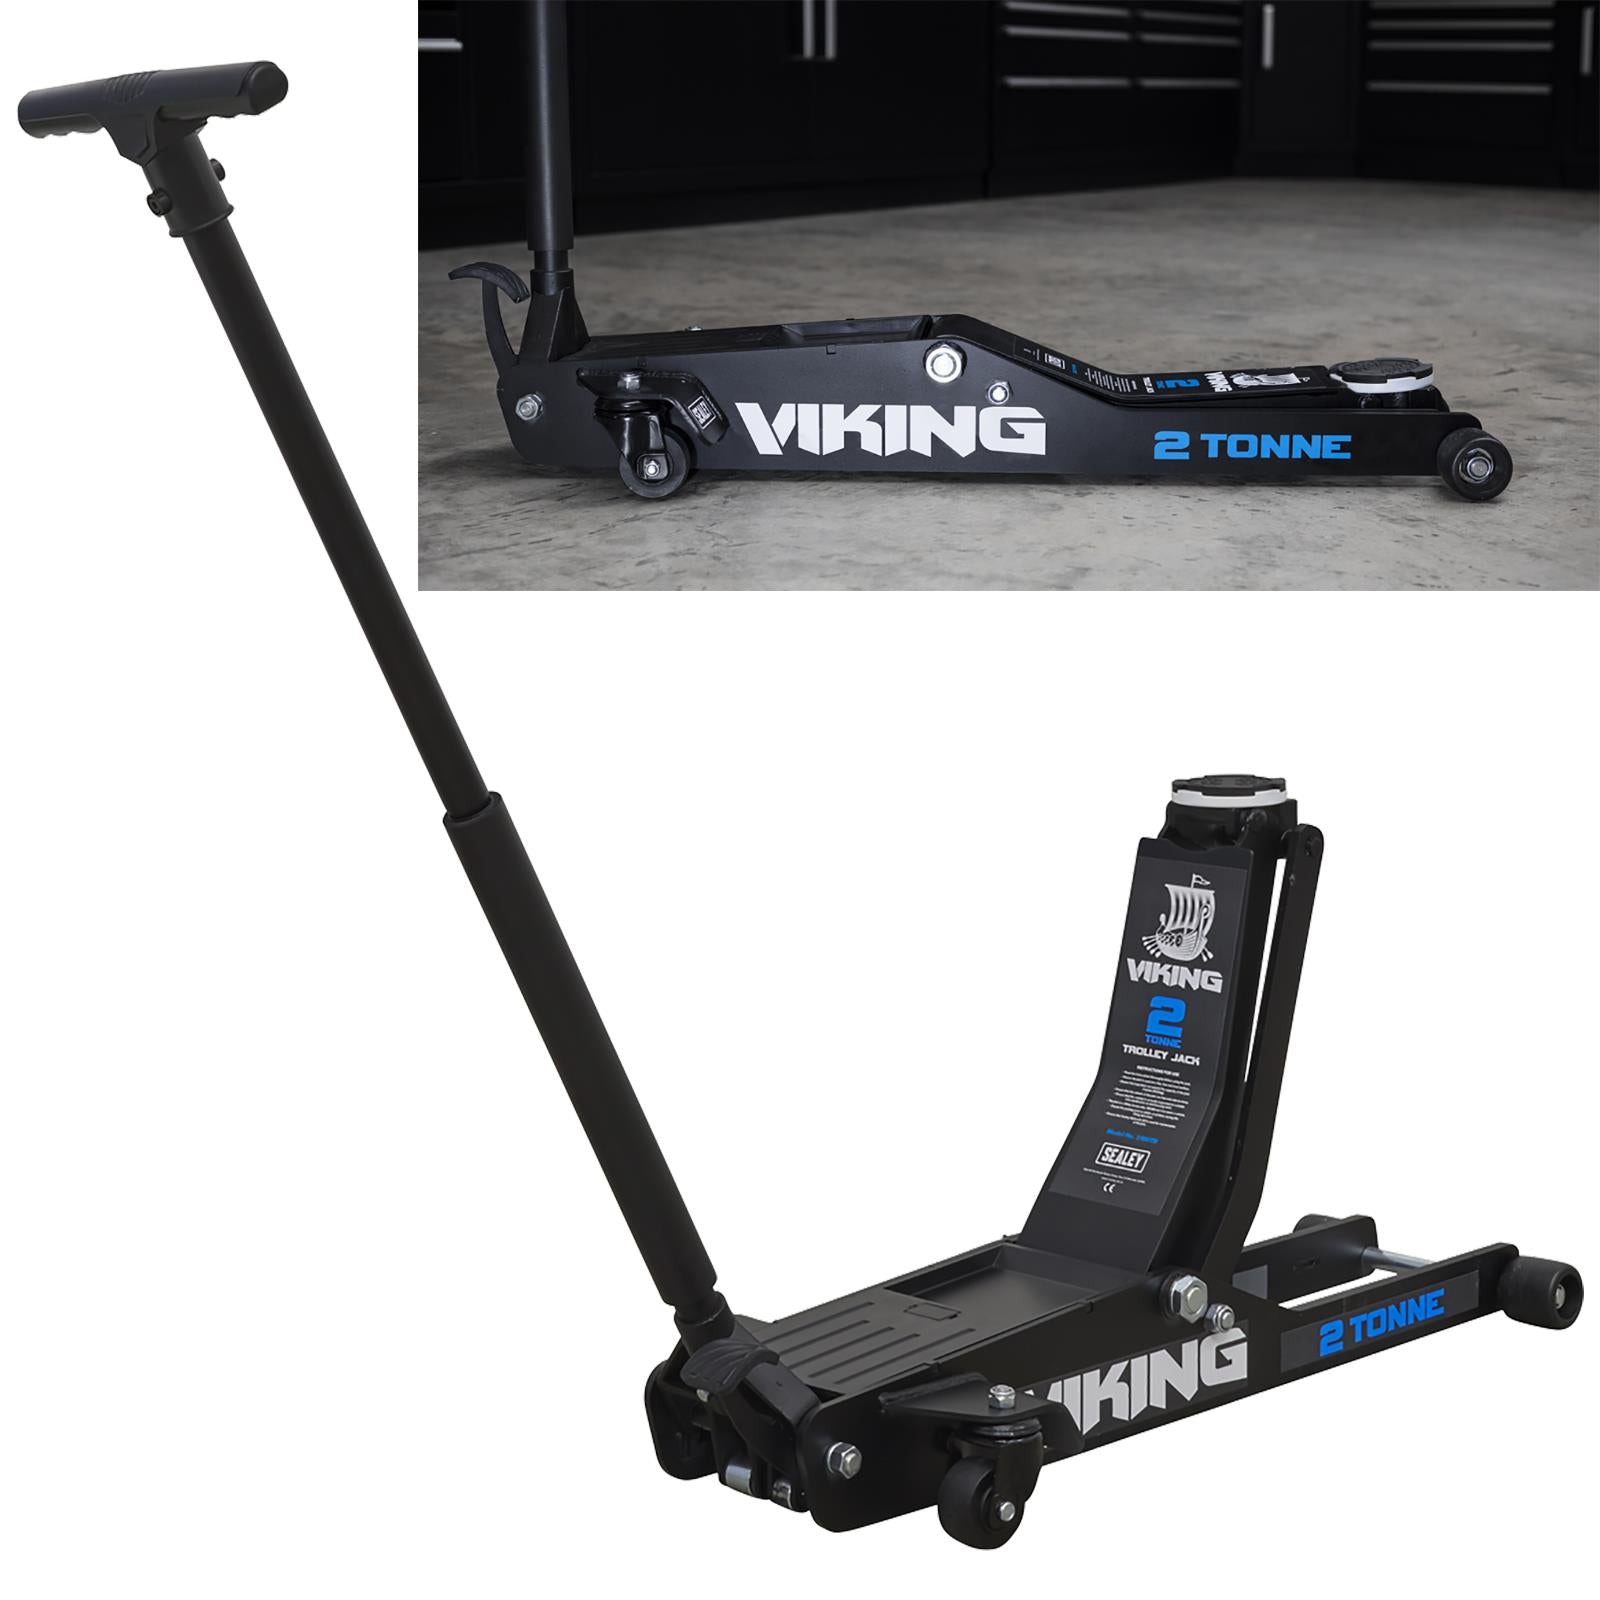 Sealey Viking 2 Tonne Low Entry Long Reach Trolley Jack with Rocket Lift